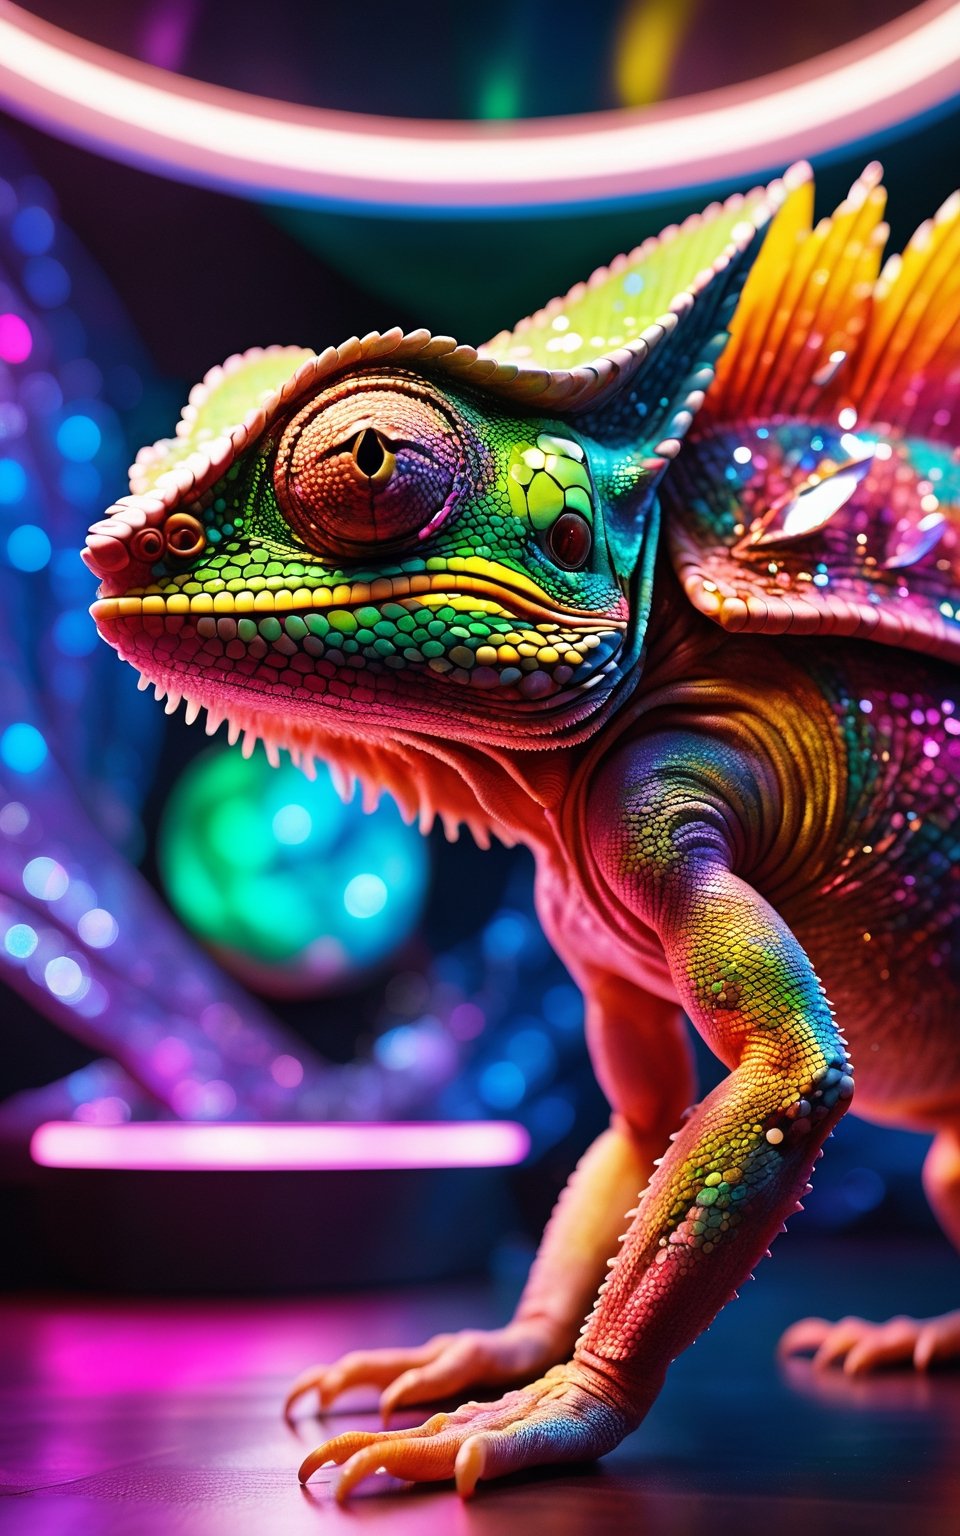 (best quality,8K,highres,masterpiece), ultra-detailed, (cute intergalactic chameleon in a space disco), a charming intergalactic chameleon with multicolored skin, blending seamlessly into a space disco environment. The chameleon's skin shimmers with a myriad of colors, reflecting the vibrant lights and pulsating energy of the disco. The space disco is constructed from comfy flow connections and nodes, creating a futuristic and visually stunning backdrop. Every detail of the chameleon and its surroundings is highly detailed, with intricate patterns and textures adding to the overall aesthetic. The chameleon's skin is translucent, allowing glimpses of its internal structure to shine through in the disco's neon glow. Feel free to add your own creative touches to enhance the whimsical and futuristic atmosphere of this captivating scene.